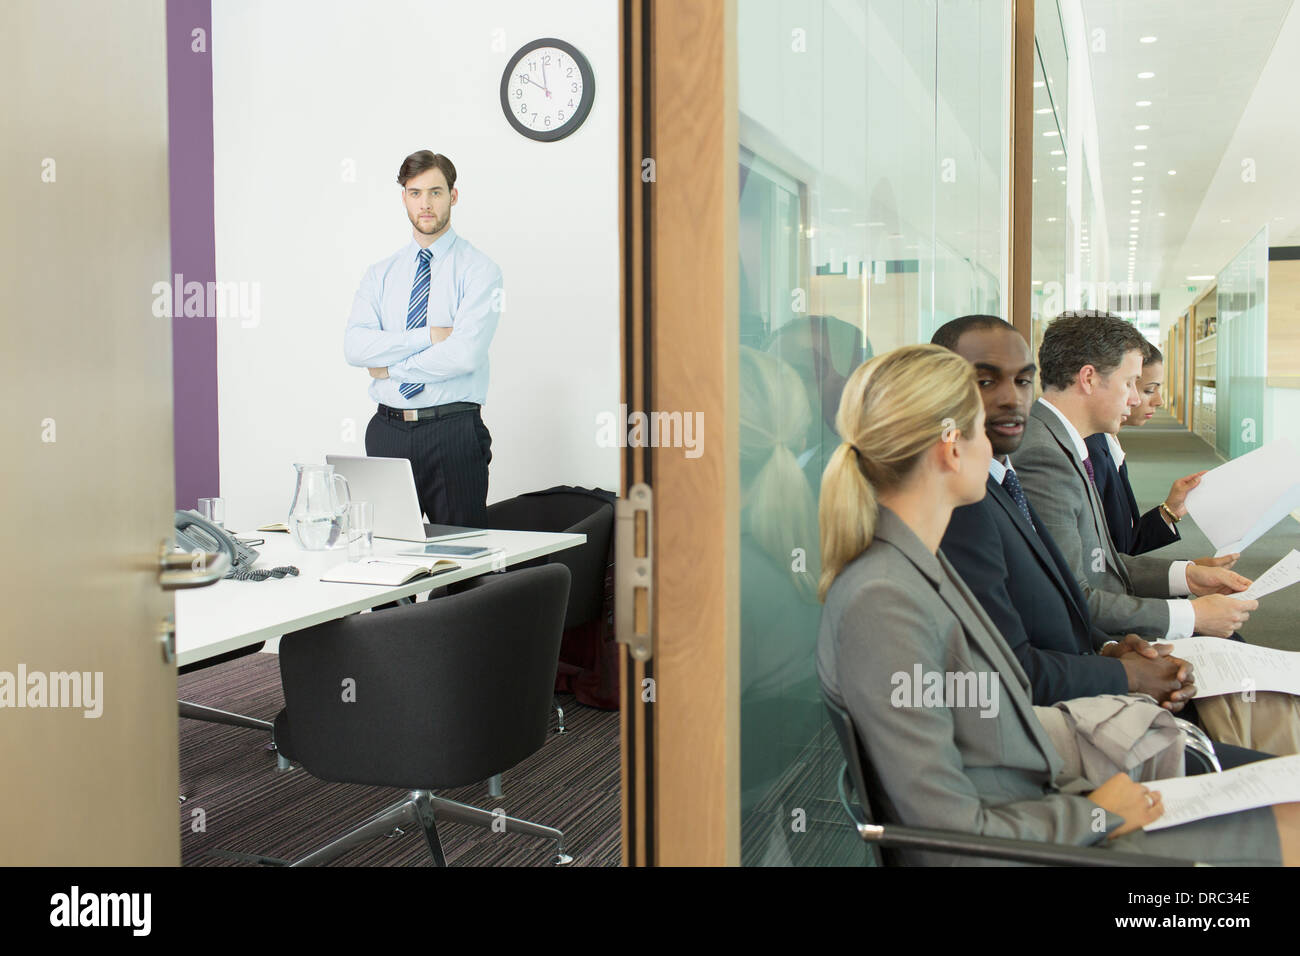 Businessman standing in office and business people in corridor Stock Photo